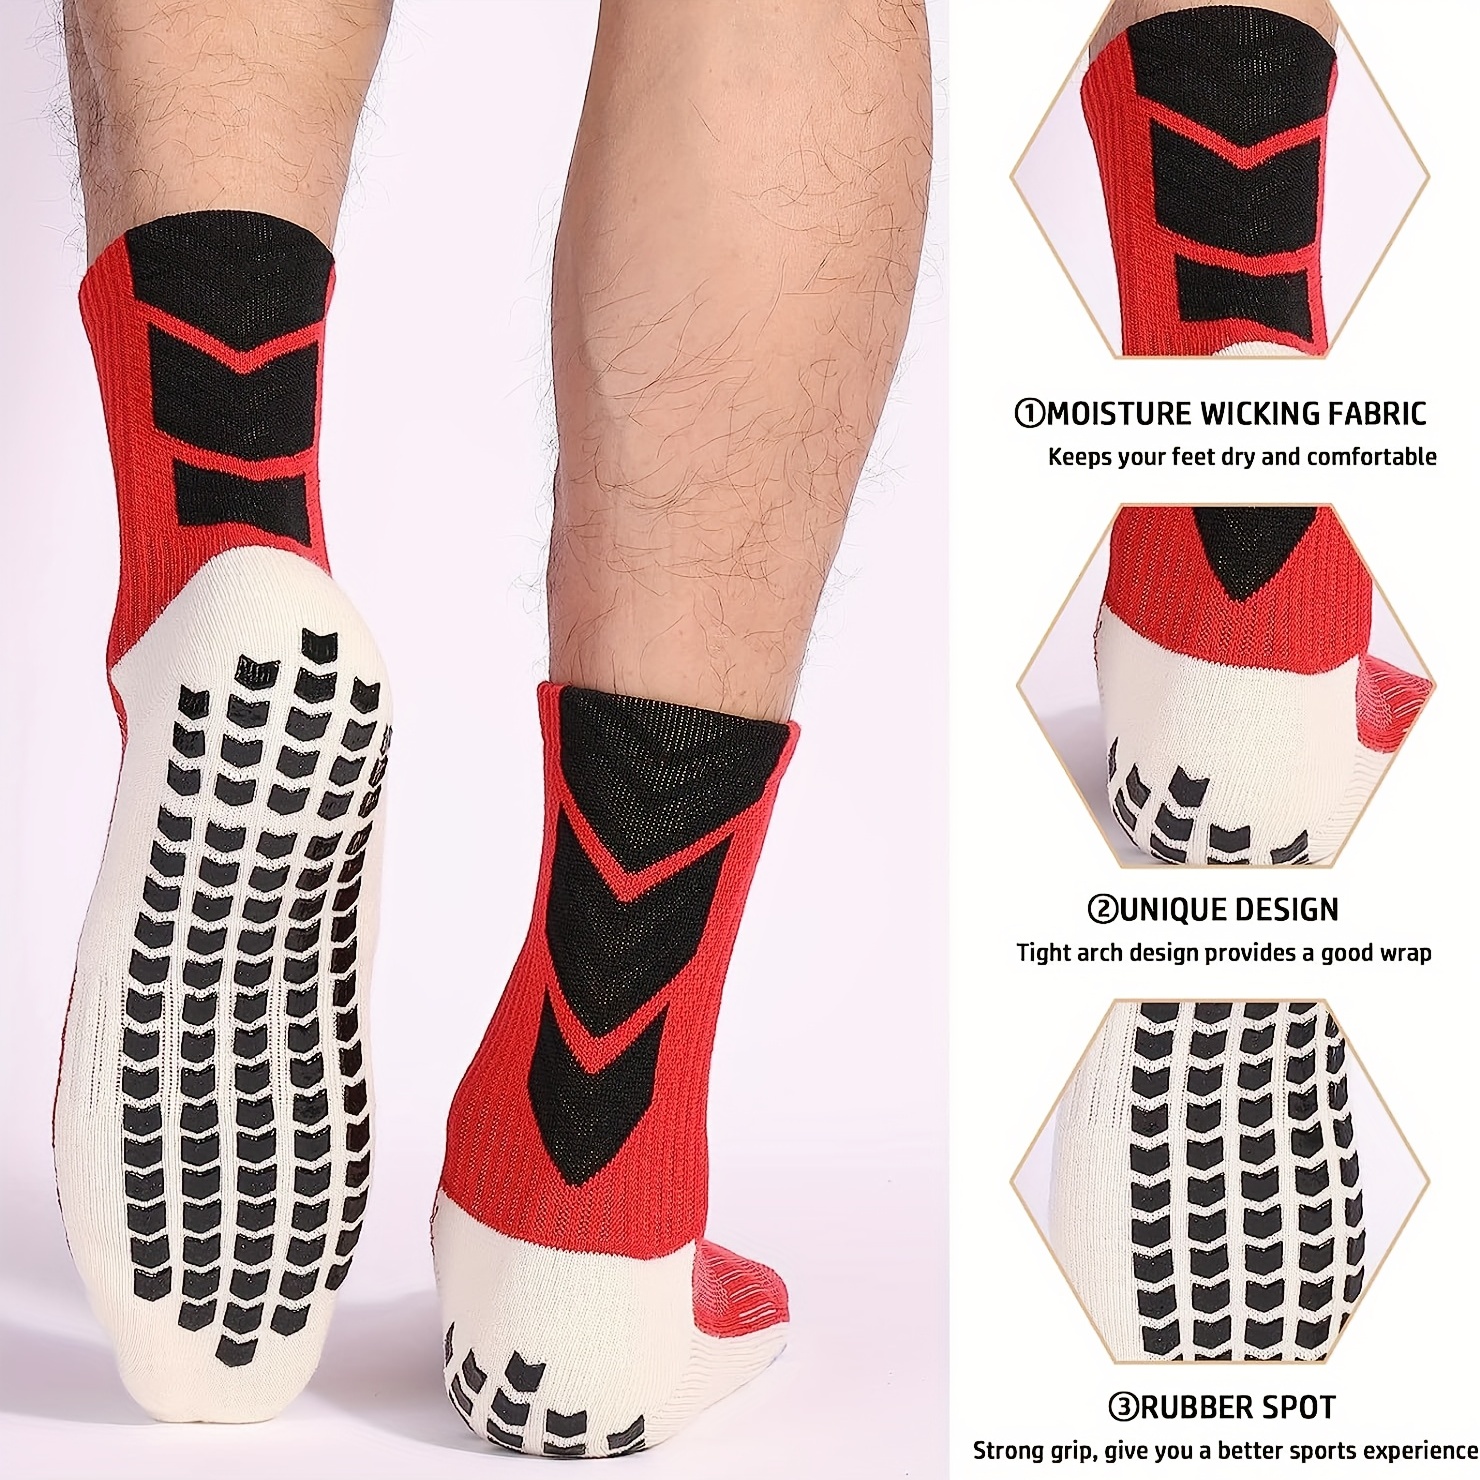 Sports Grip Youth Soccer Sockss For Men Anti Slip, Long Youth Soccer Socks  For Football, Basketball, Soccer, Volleyball, And Running From Toysmall666,  $3.12